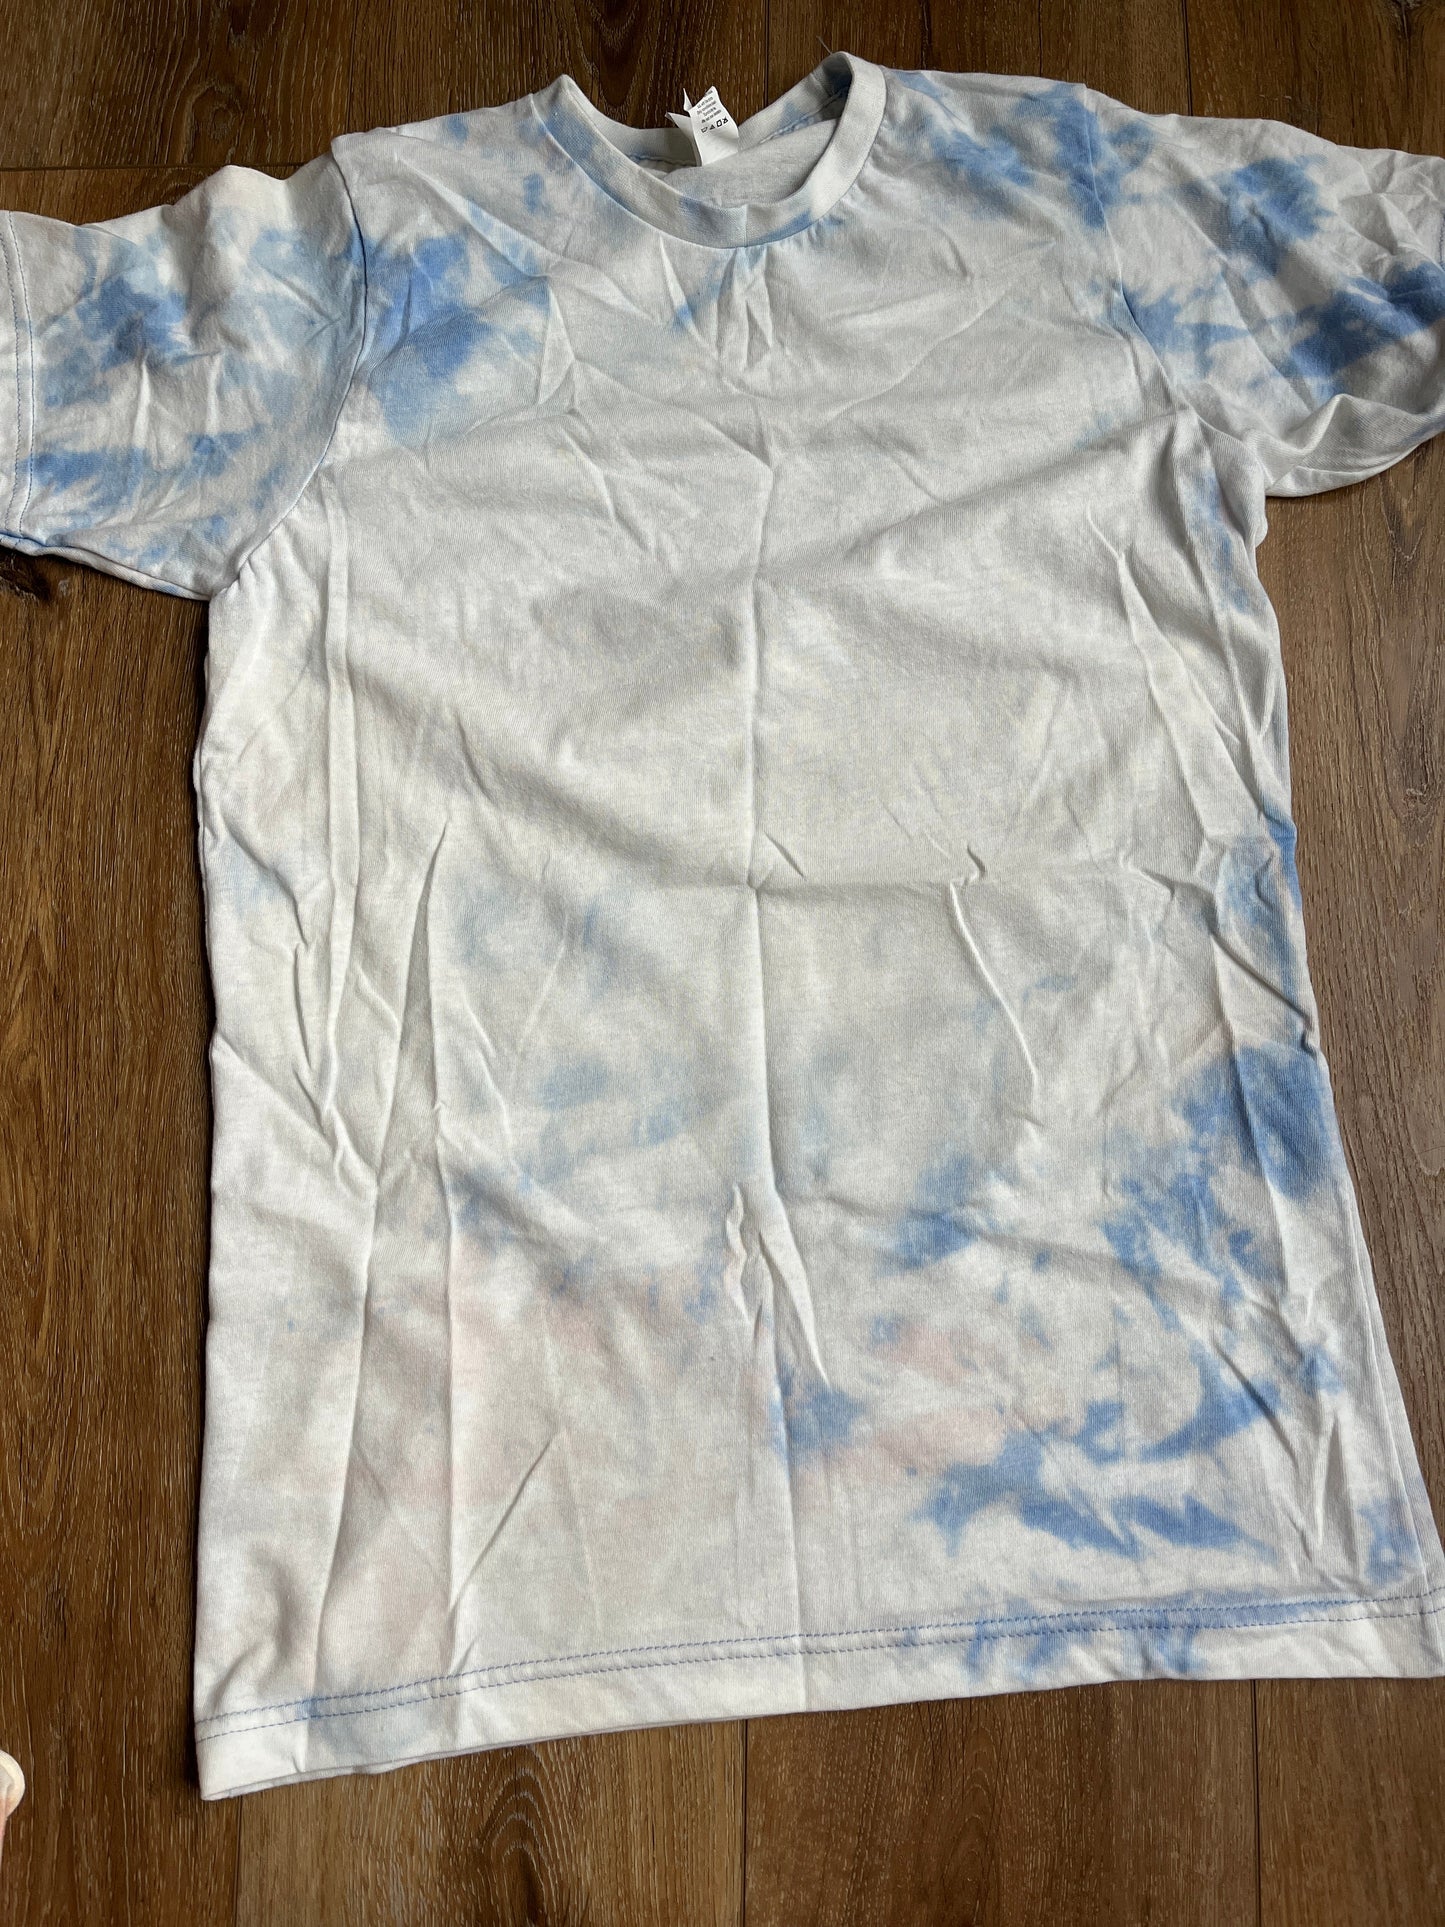 Size XL Build Your Own Bleached Tee--CHOOSE DESIGN IN GROUP